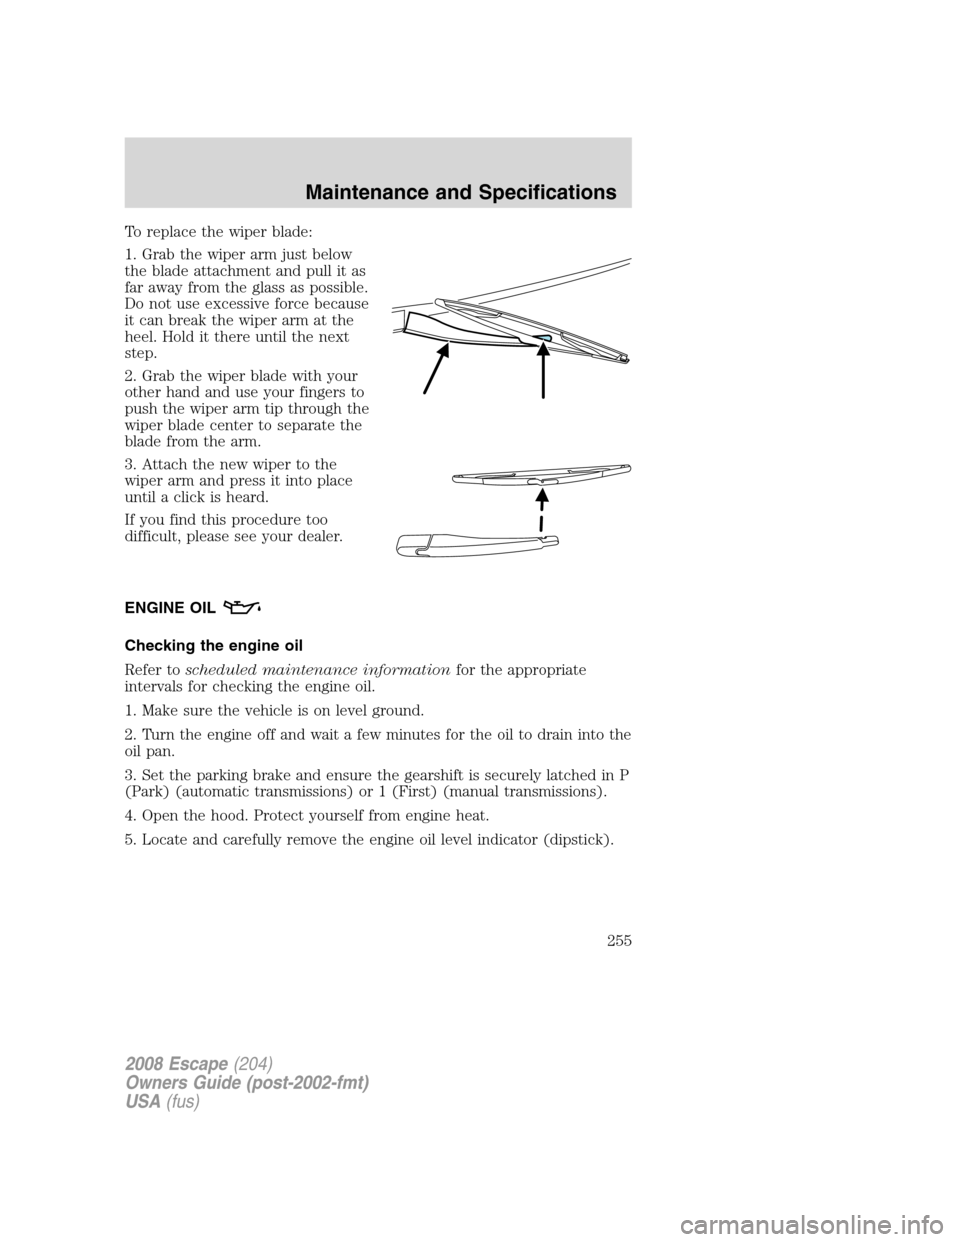 FORD ESCAPE 2008 2.G Owners Manual To replace the wiper blade:
1. Grab the wiper arm just below
the blade attachment and pull it as
far away from the glass as possible.
Do not use excessive force because
it can break the wiper arm at t